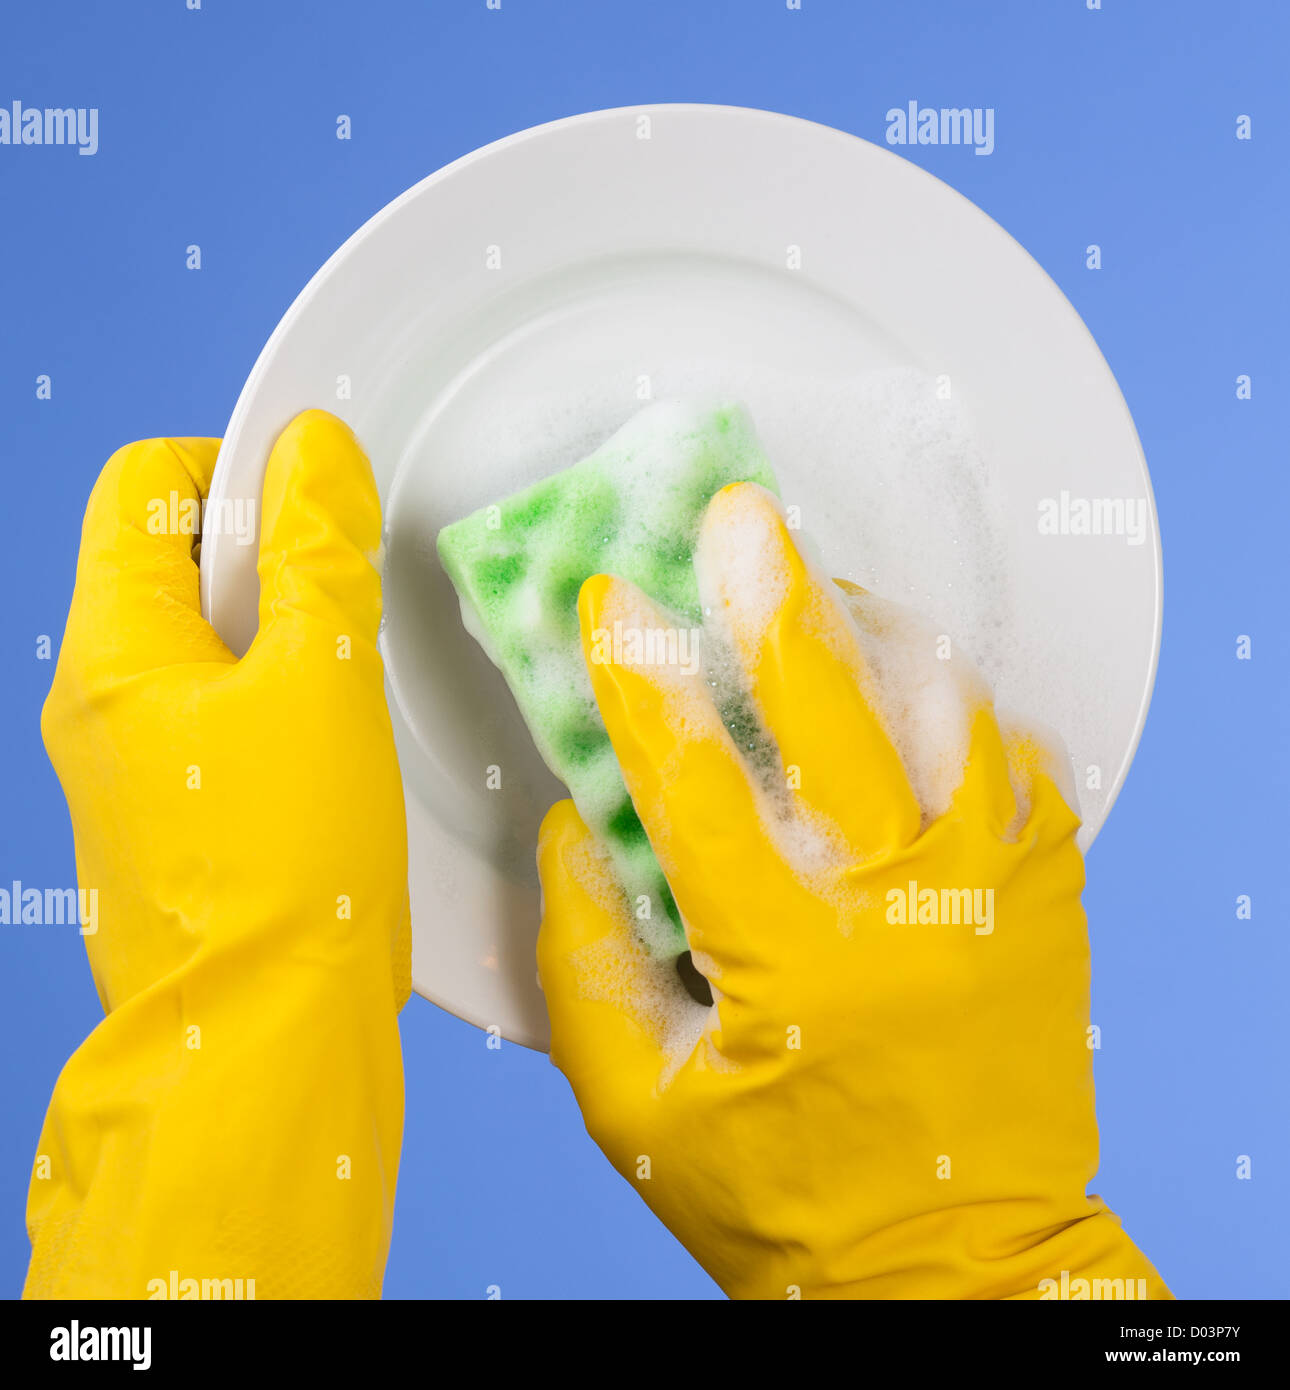 Hands in yellow gloves washing dish on blue background Stock Photo